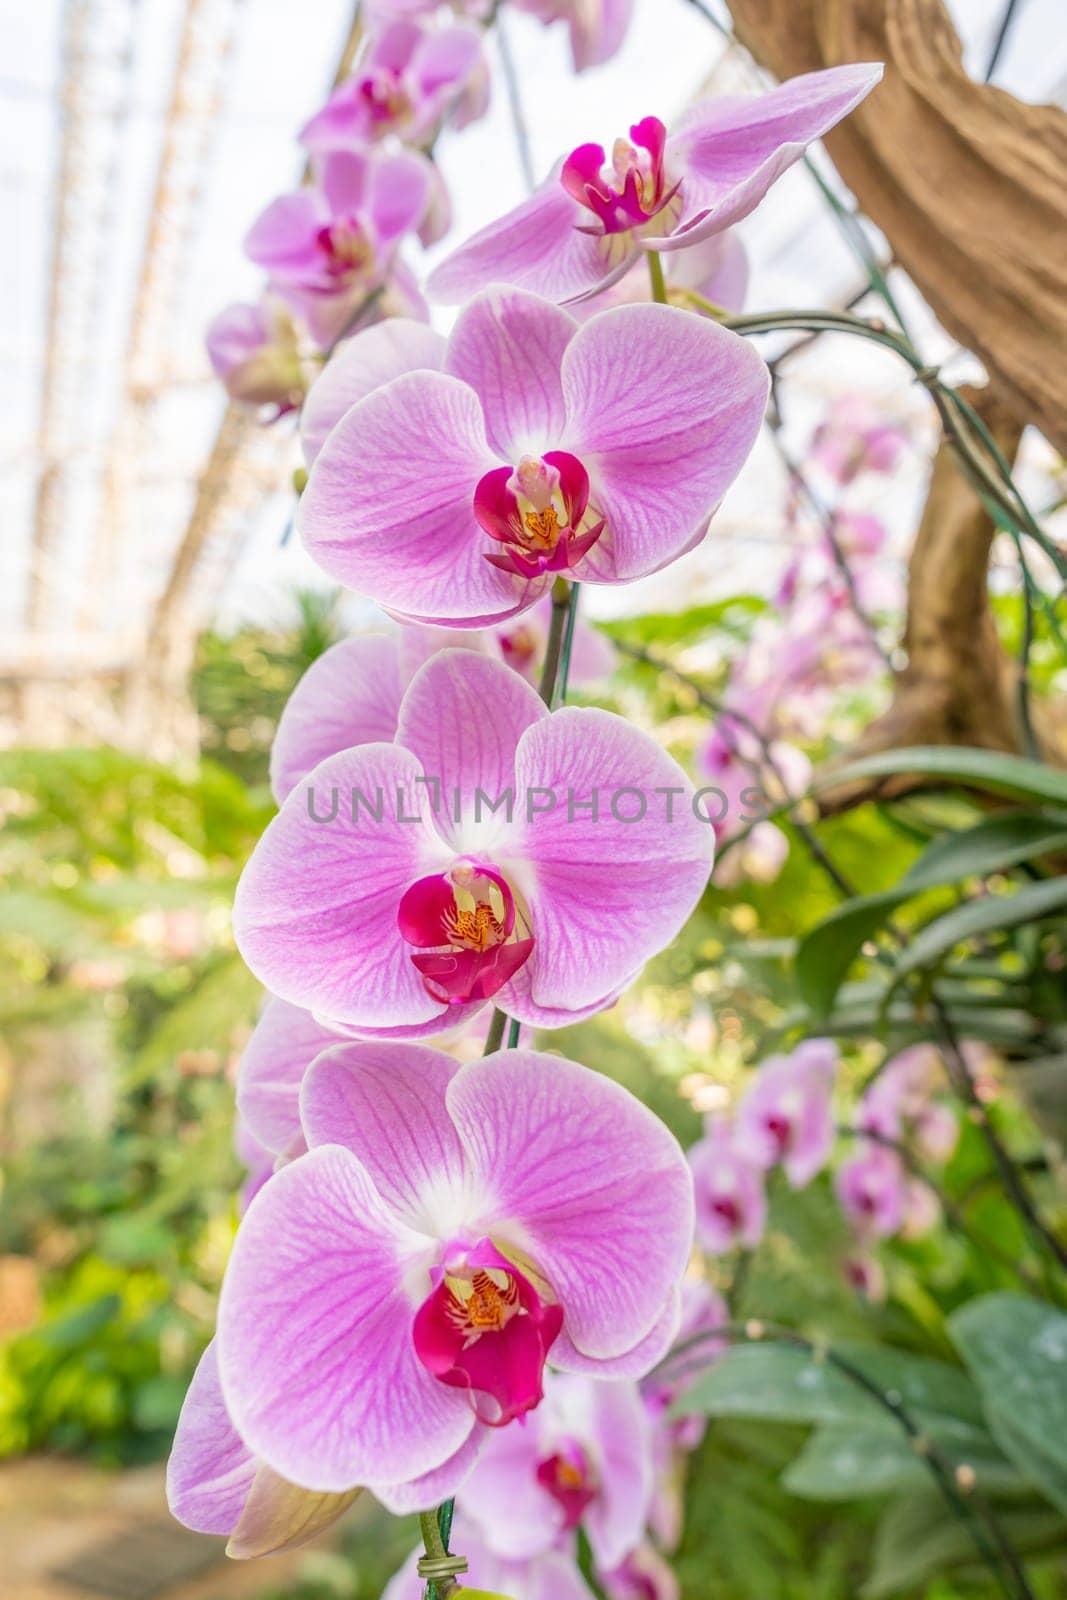 The large magenta and white colored Phalaenopsis orchids in garden.